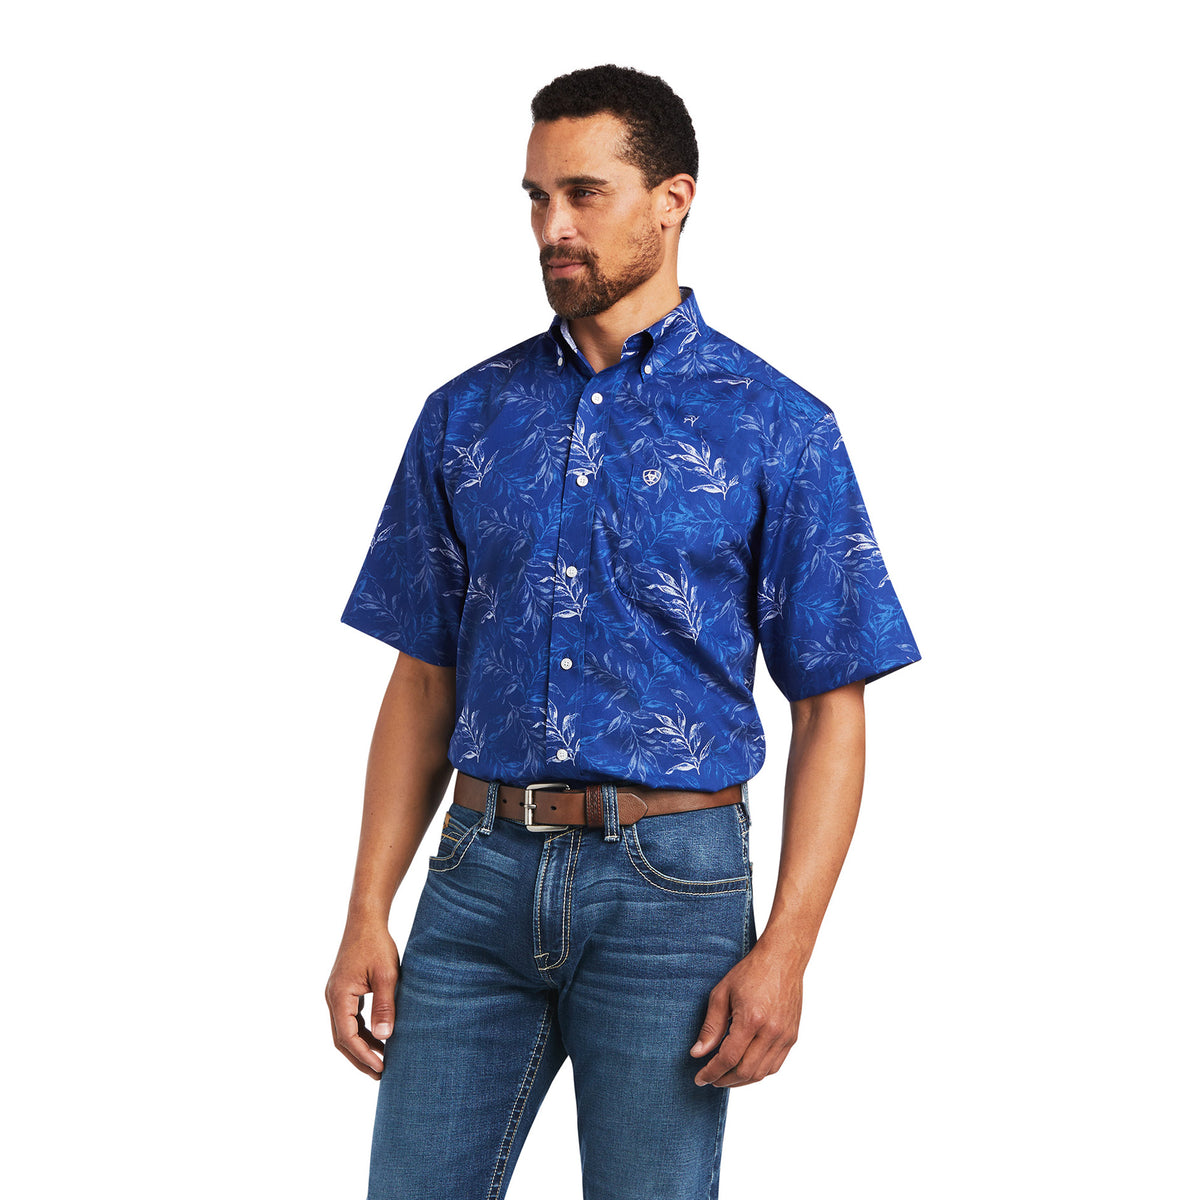 Men's Ariat Wrinkle Free Norman Classic Fit Button Down Shirt #1004054 ...